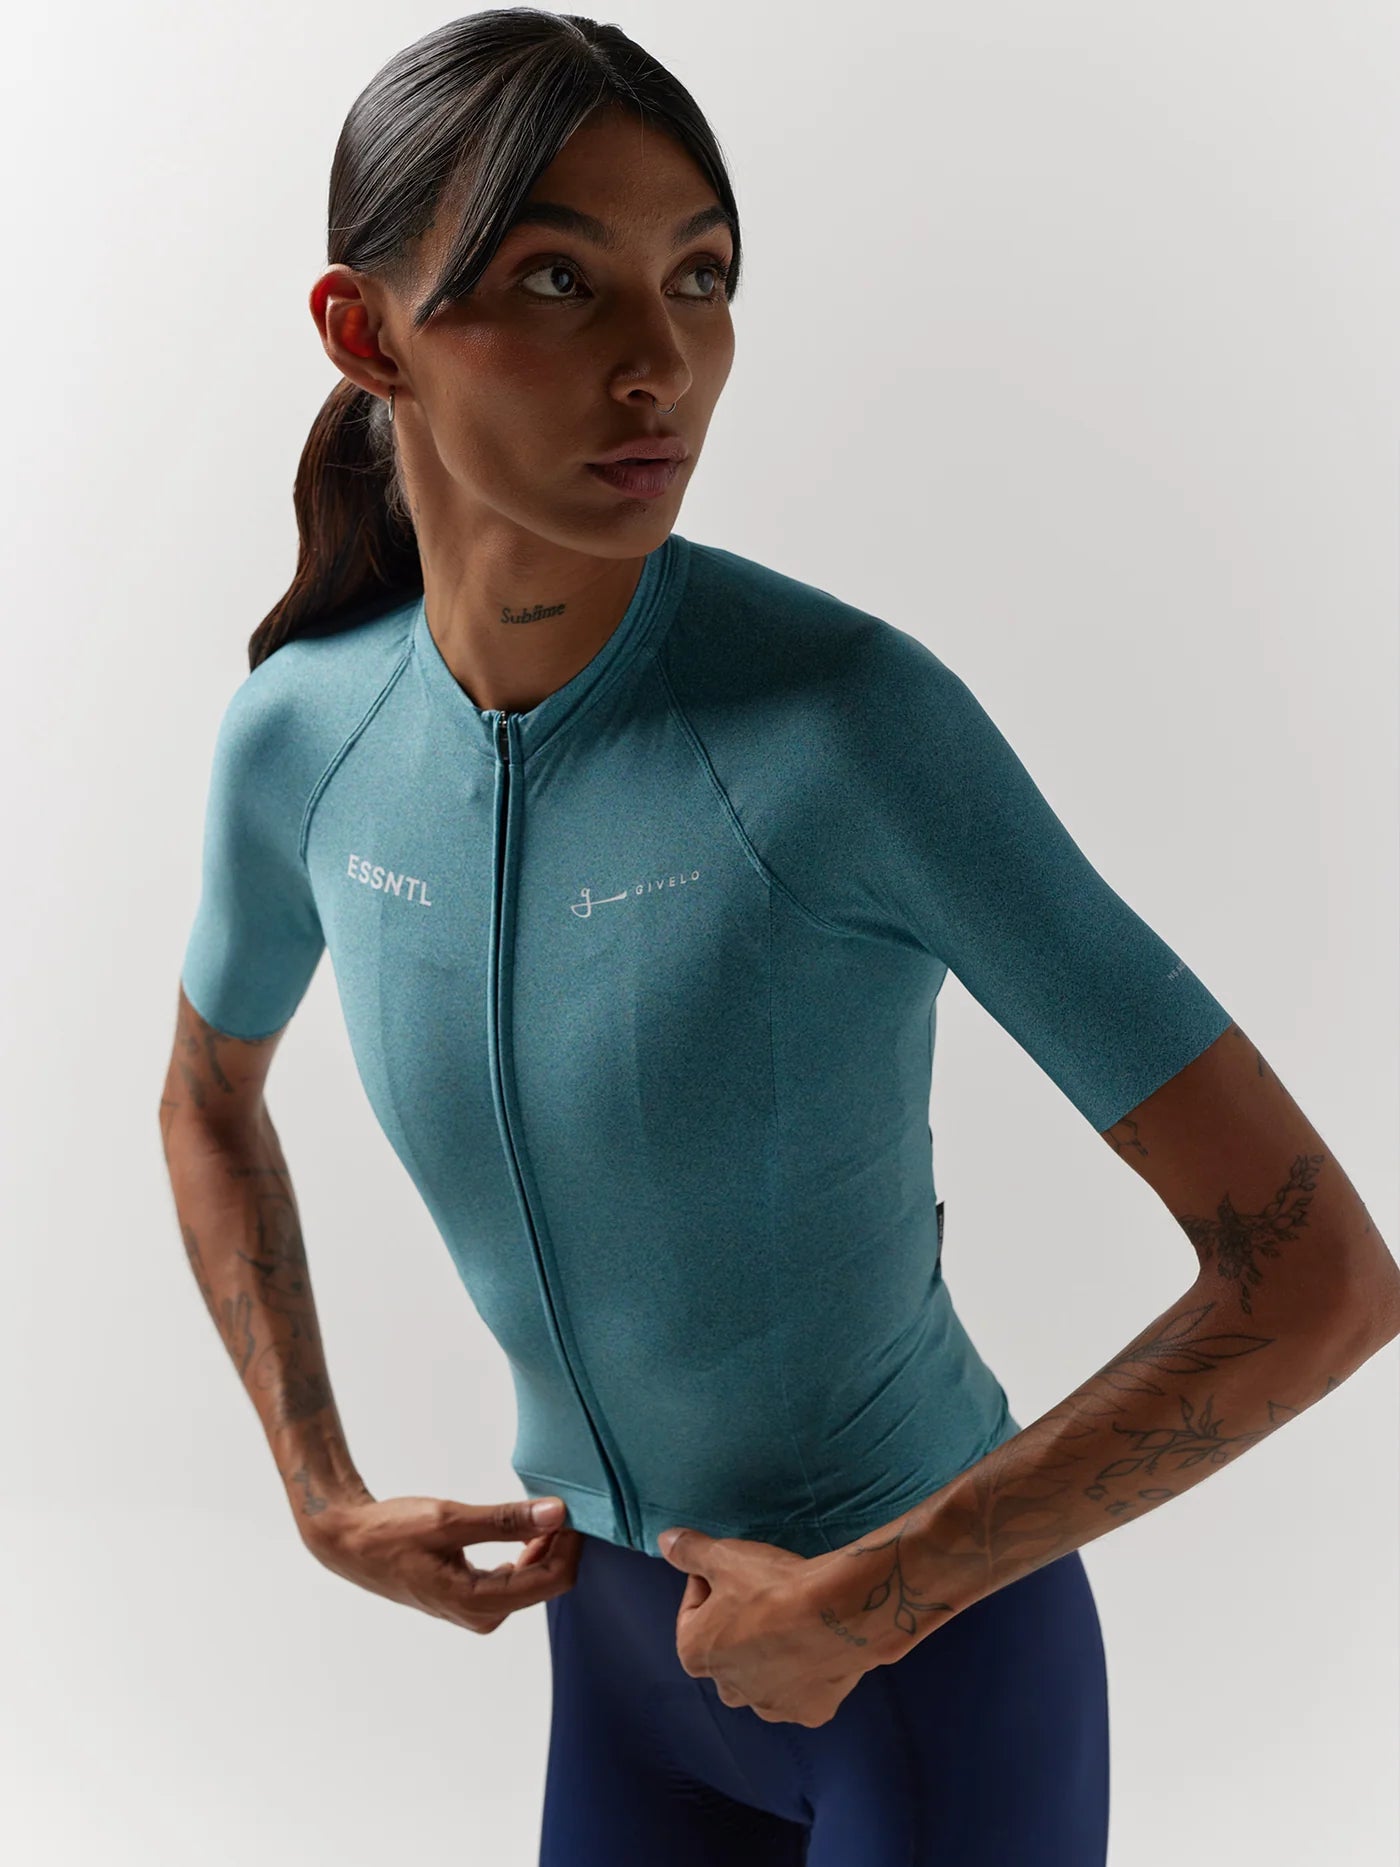 Givelo - Maillot Court Essentl Maillots Givelo 